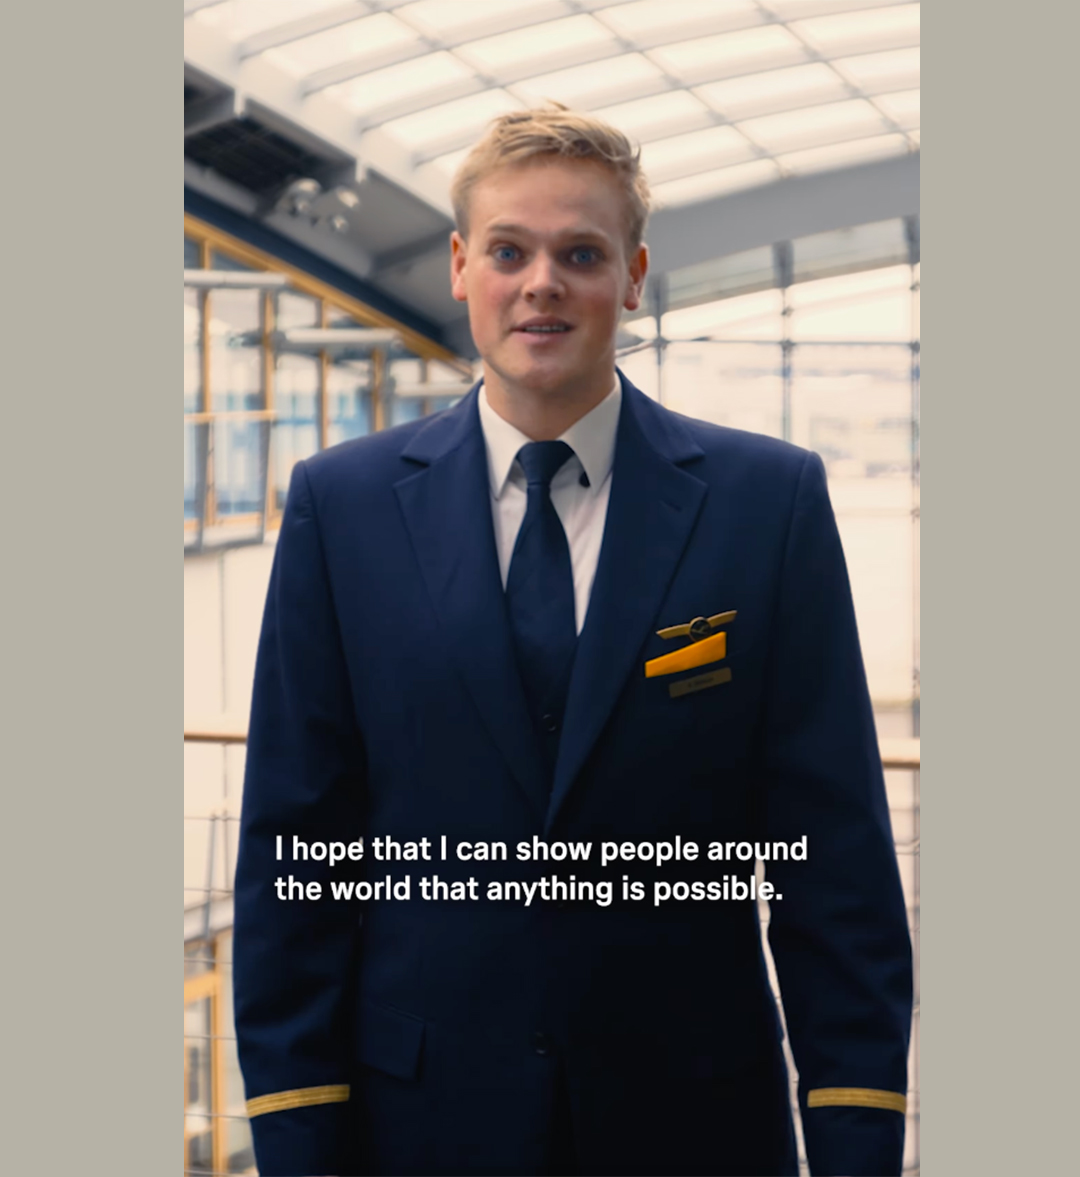 Learn about Alex’s remarkable journey at Lufthansa